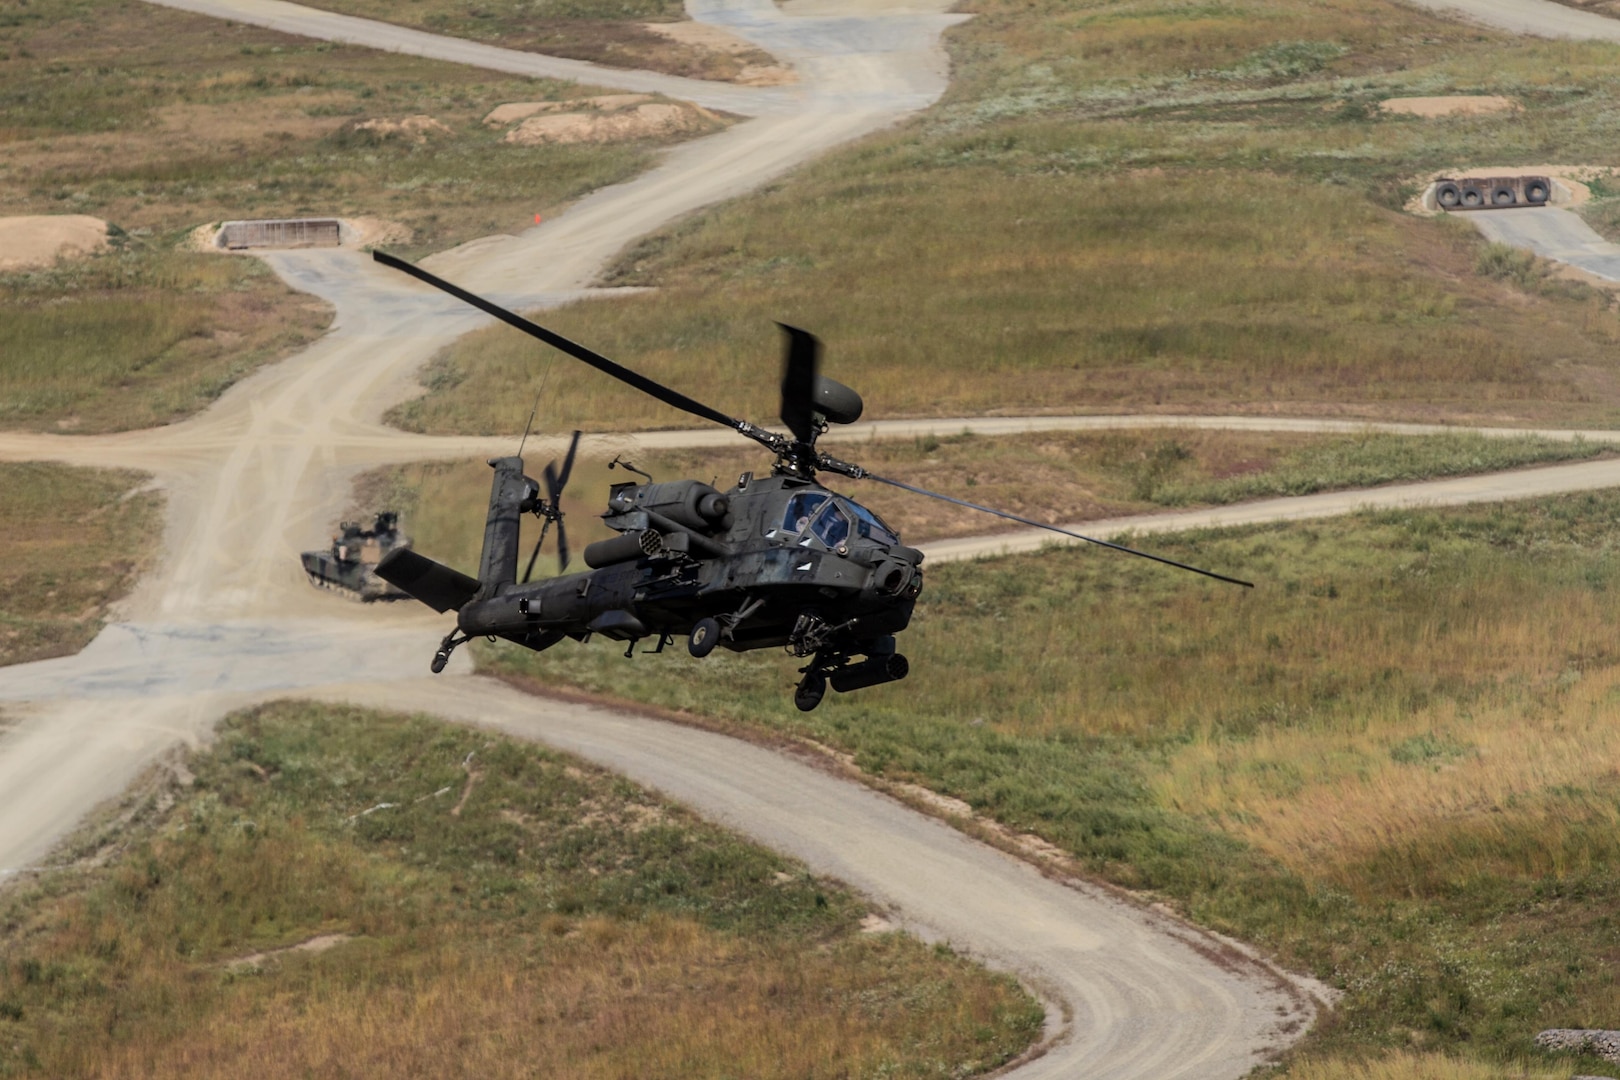 CAMP HUMPHREYS, South Korea (Sept. 21, 2015) - An AH-64 Apache augmented to the 2nd Battalion, 2nd Aviation Regiment, 2nd Combat Aviation Brigade provides attack support to ground forces at the Rodriguez Live Fire Complex in South Korea.  